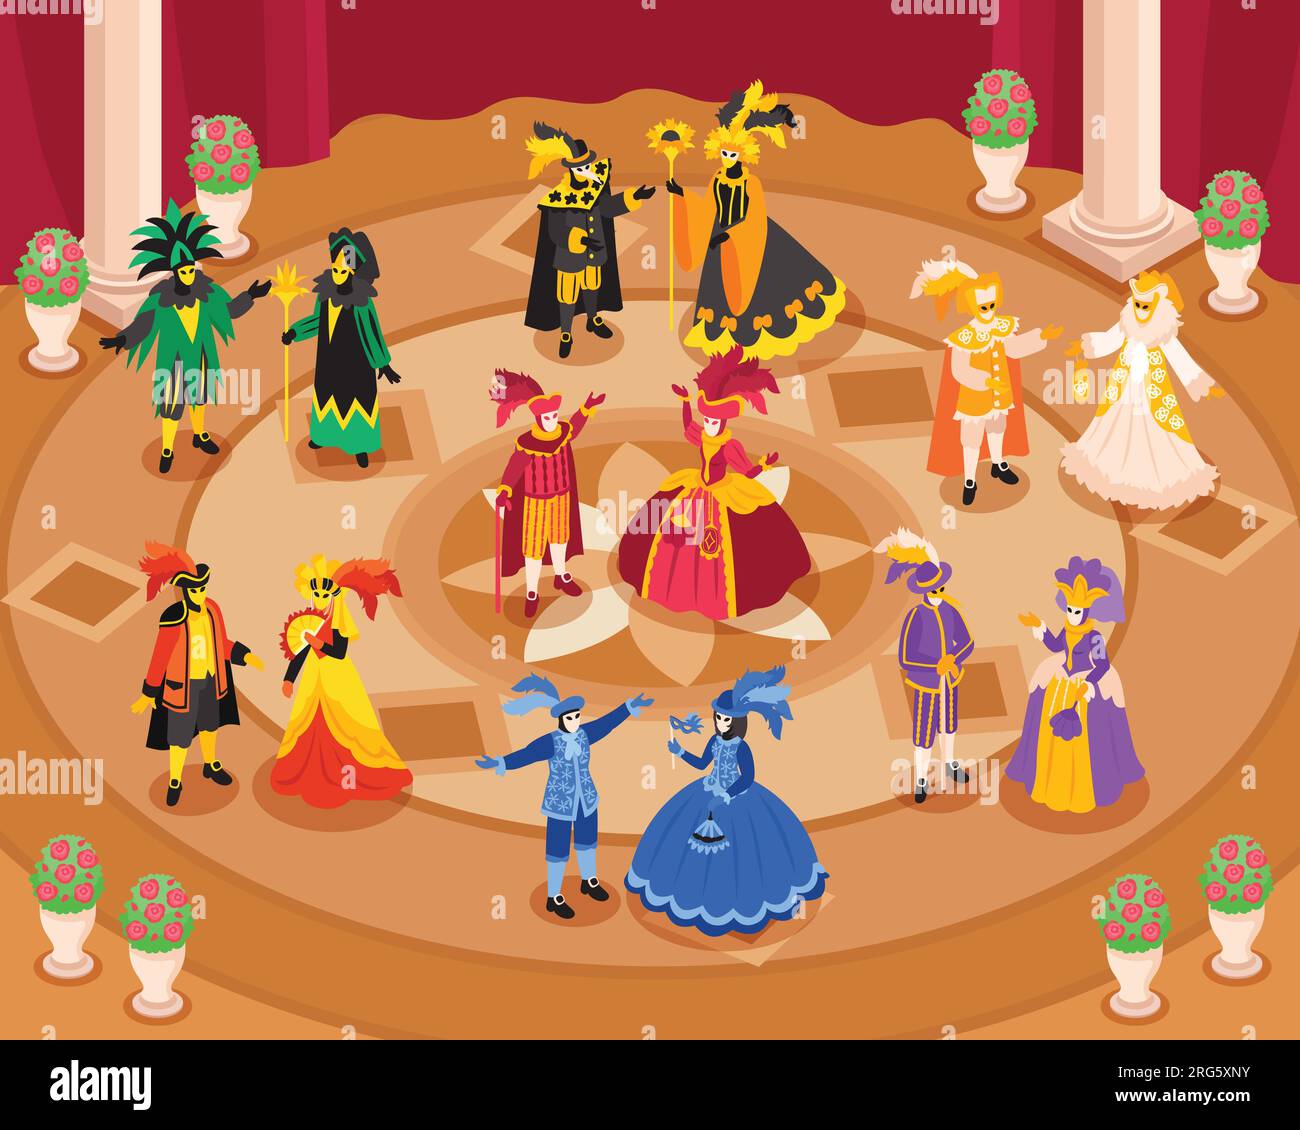 Isometric venetian costumes carnival composition with indoor scenery luxury interior and human characters wearing medieval outfits vector illustration Stock Vector